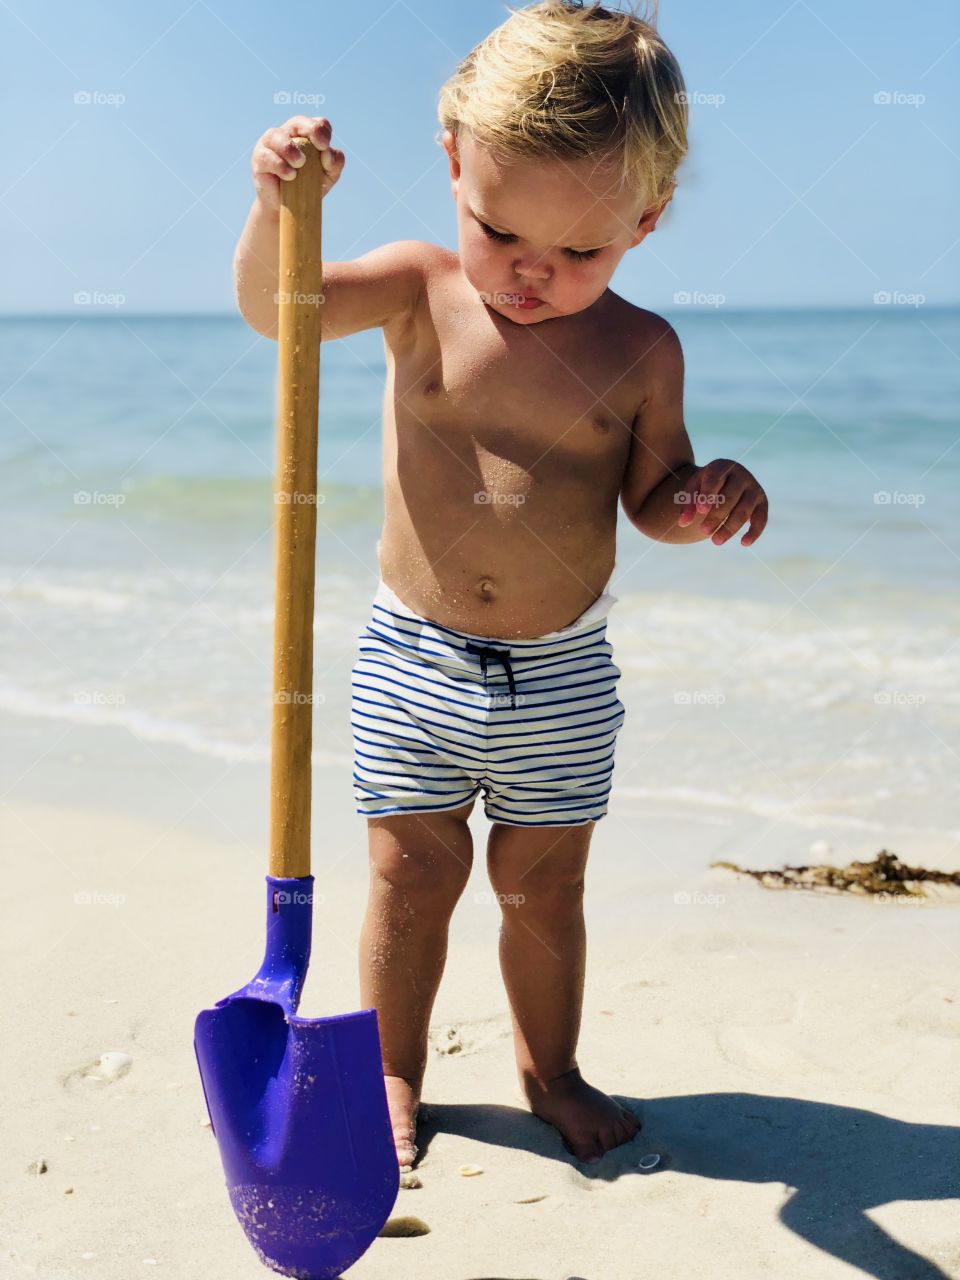 Small child shoveling at the beach 